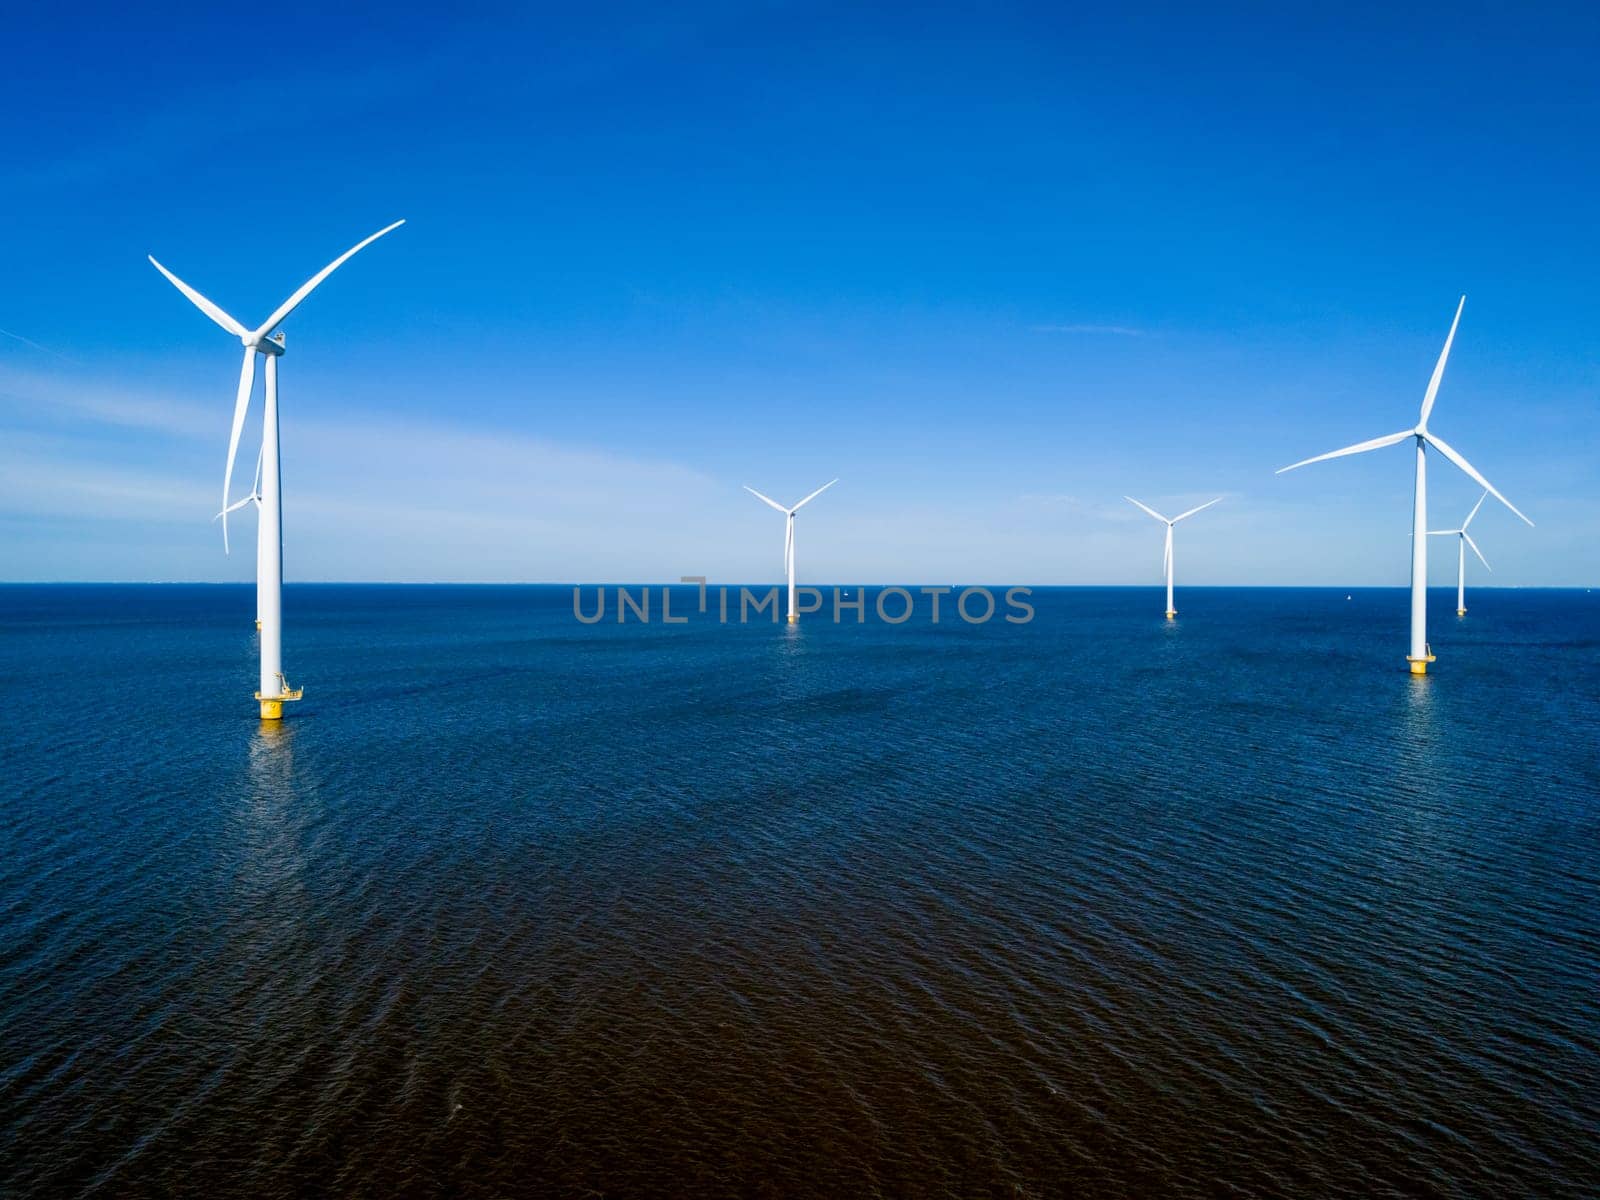 A group of wind turbines gracefully spin above the surface of the ocean in the Netherlands Flevoland during the vibrant season of Spring. drone aerial view of windmill turbines green energy